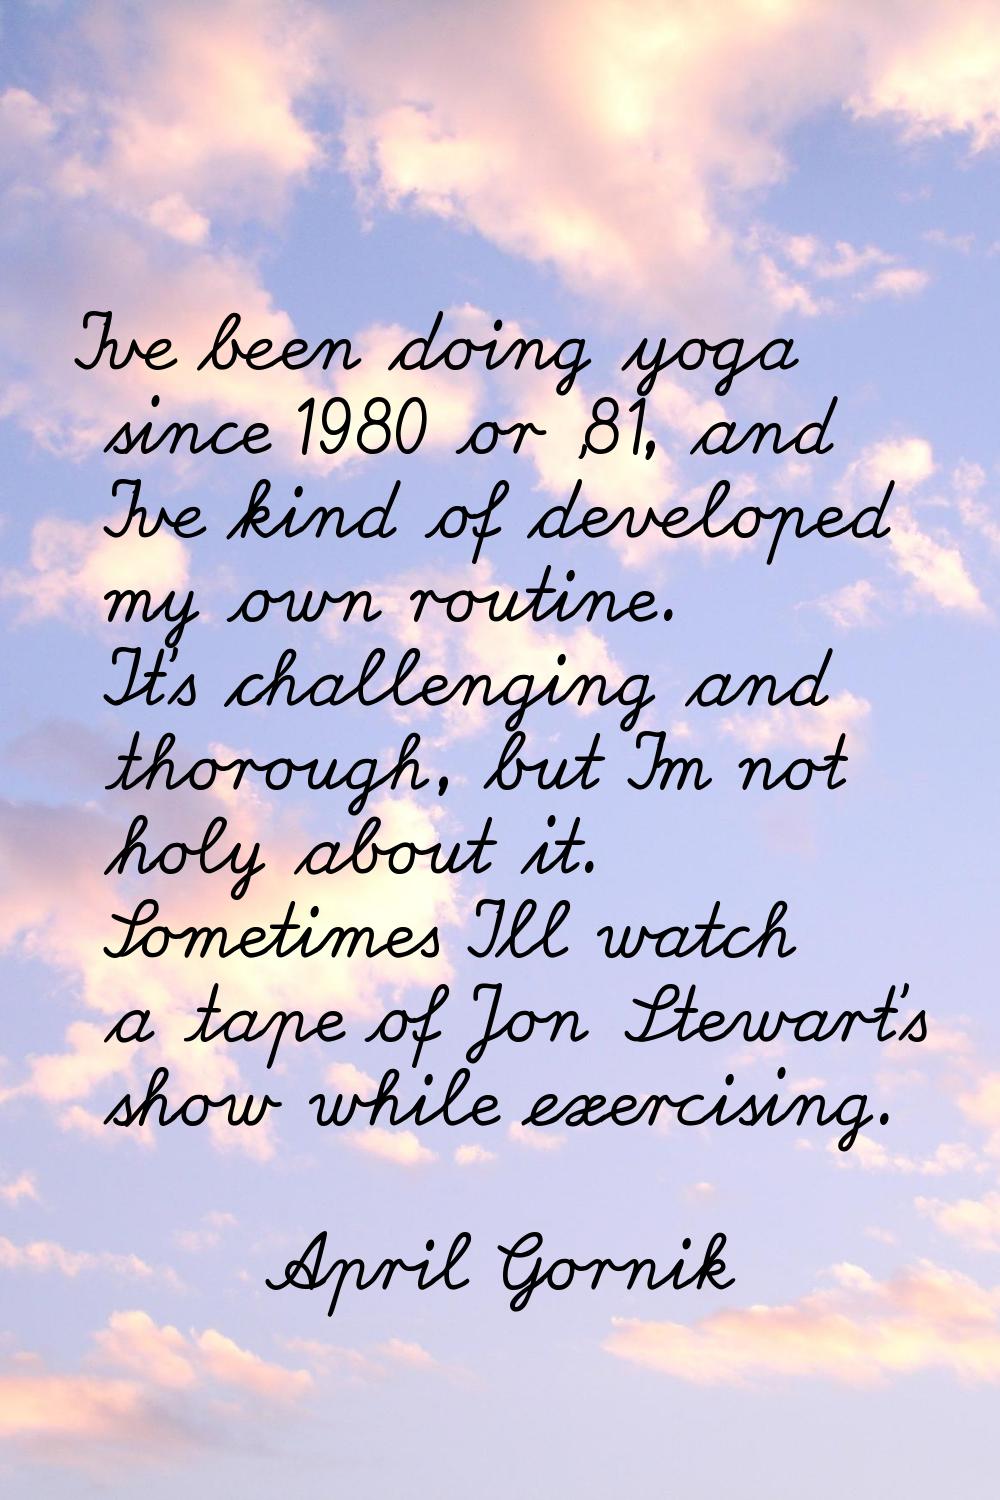 I've been doing yoga since 1980 or '81, and I've kind of developed my own routine. It's challenging